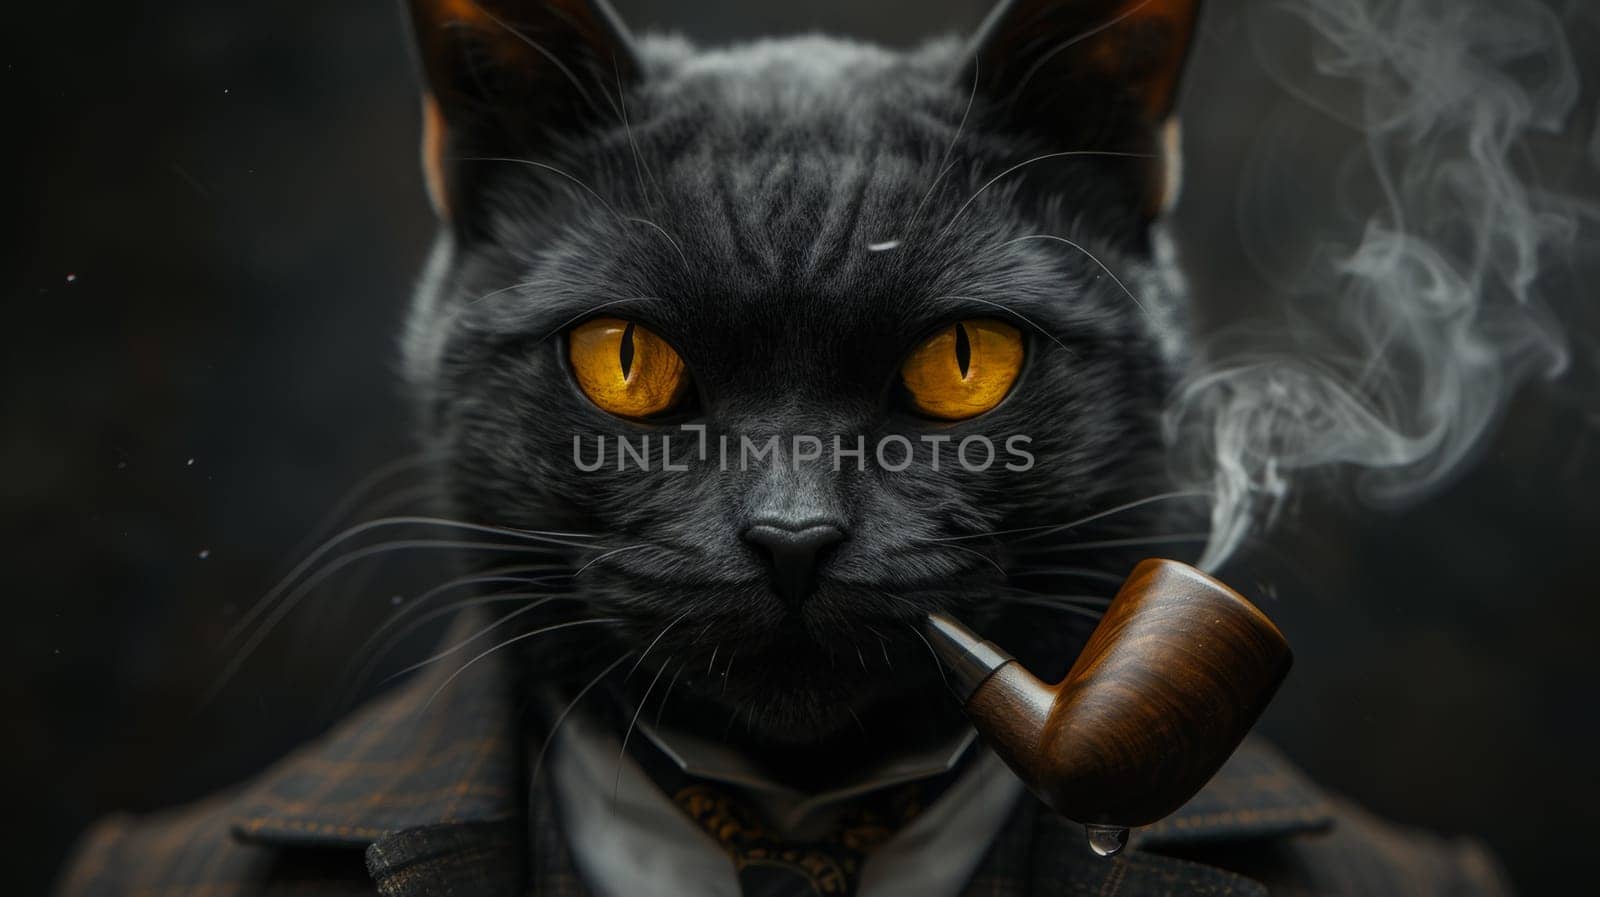 A black cat with yellow eyes smoking a pipe and wearing a suit